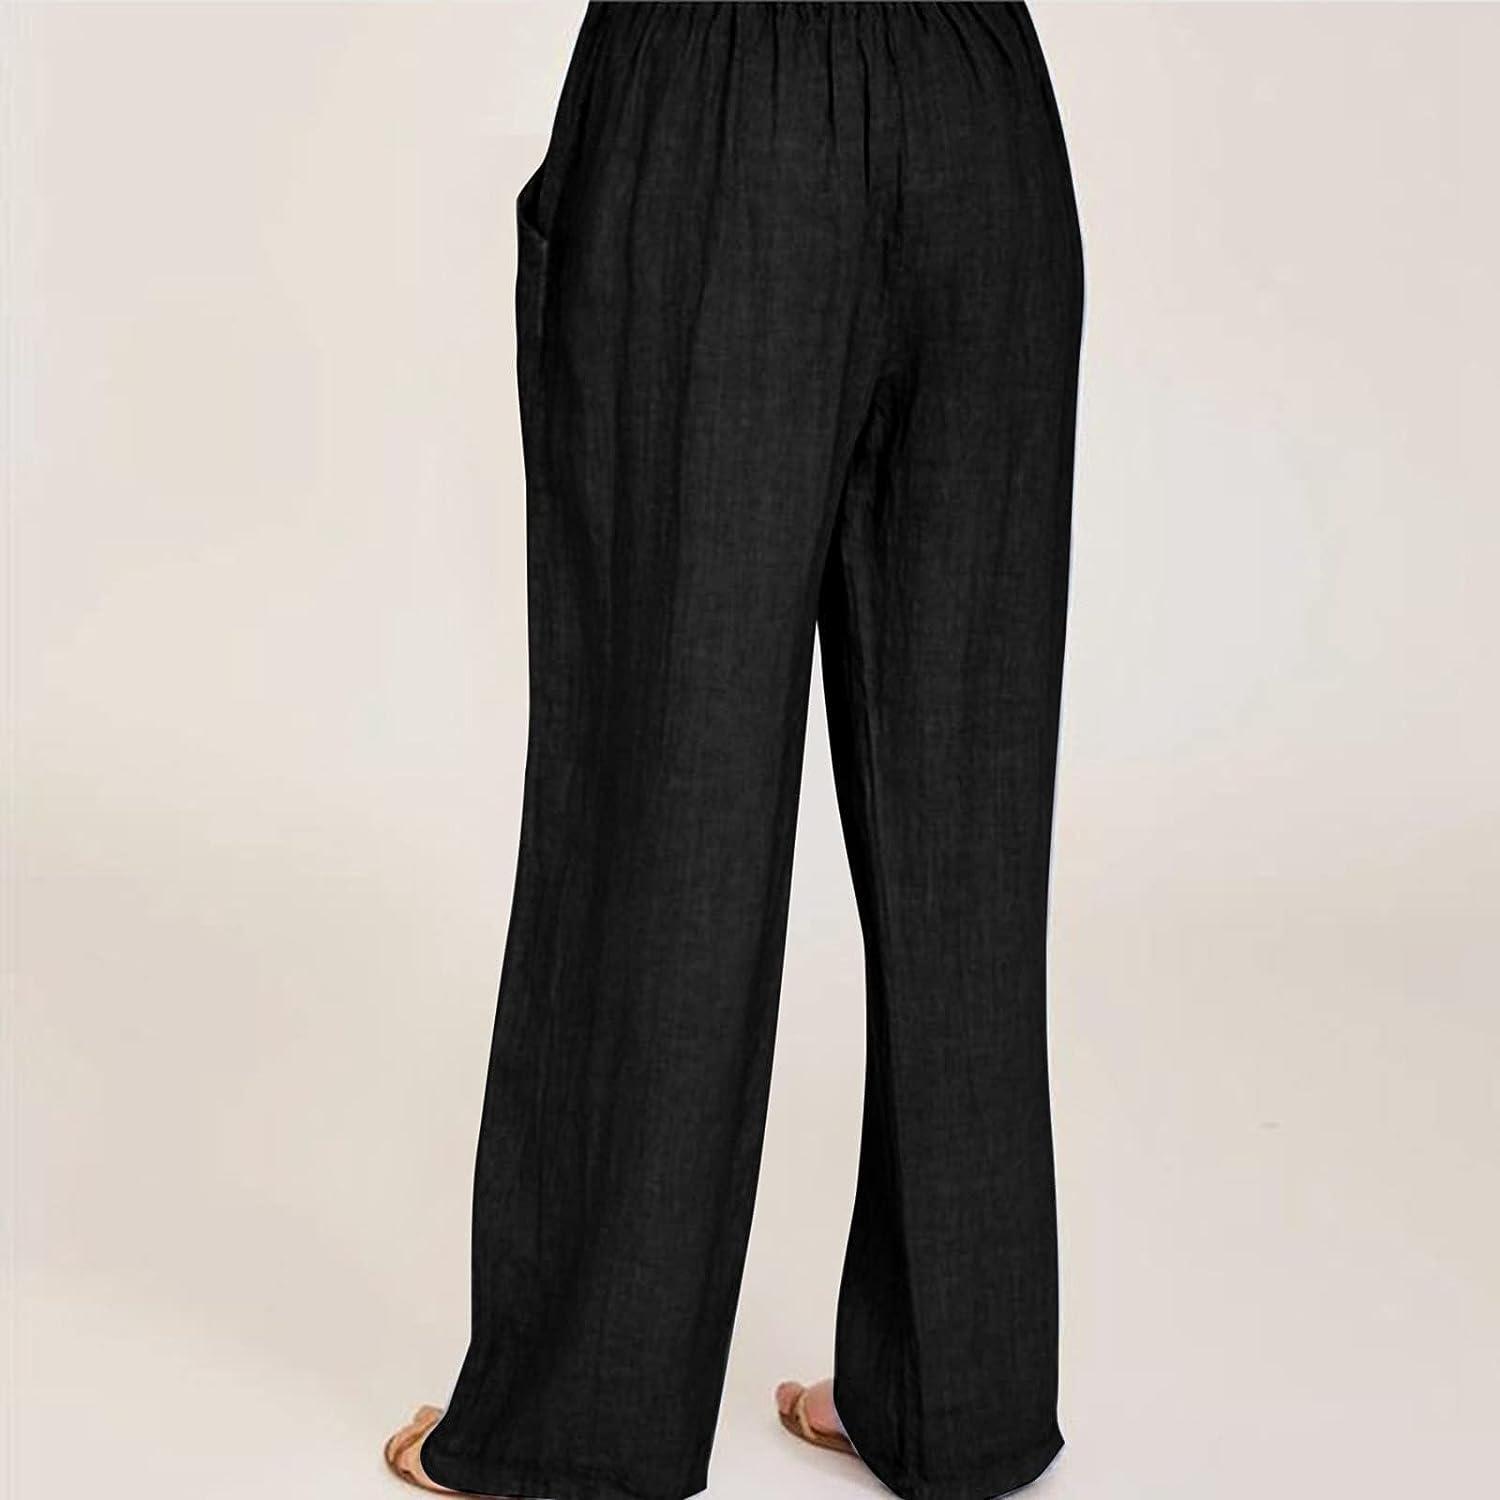  High Waisted Dress Pants for Women Cotton Linen Summer Pants  Casual Lightweight Plus Size Drawstring Wide Leg Pant Loose Fit Lounge  Trousers : Sports & Outdoors